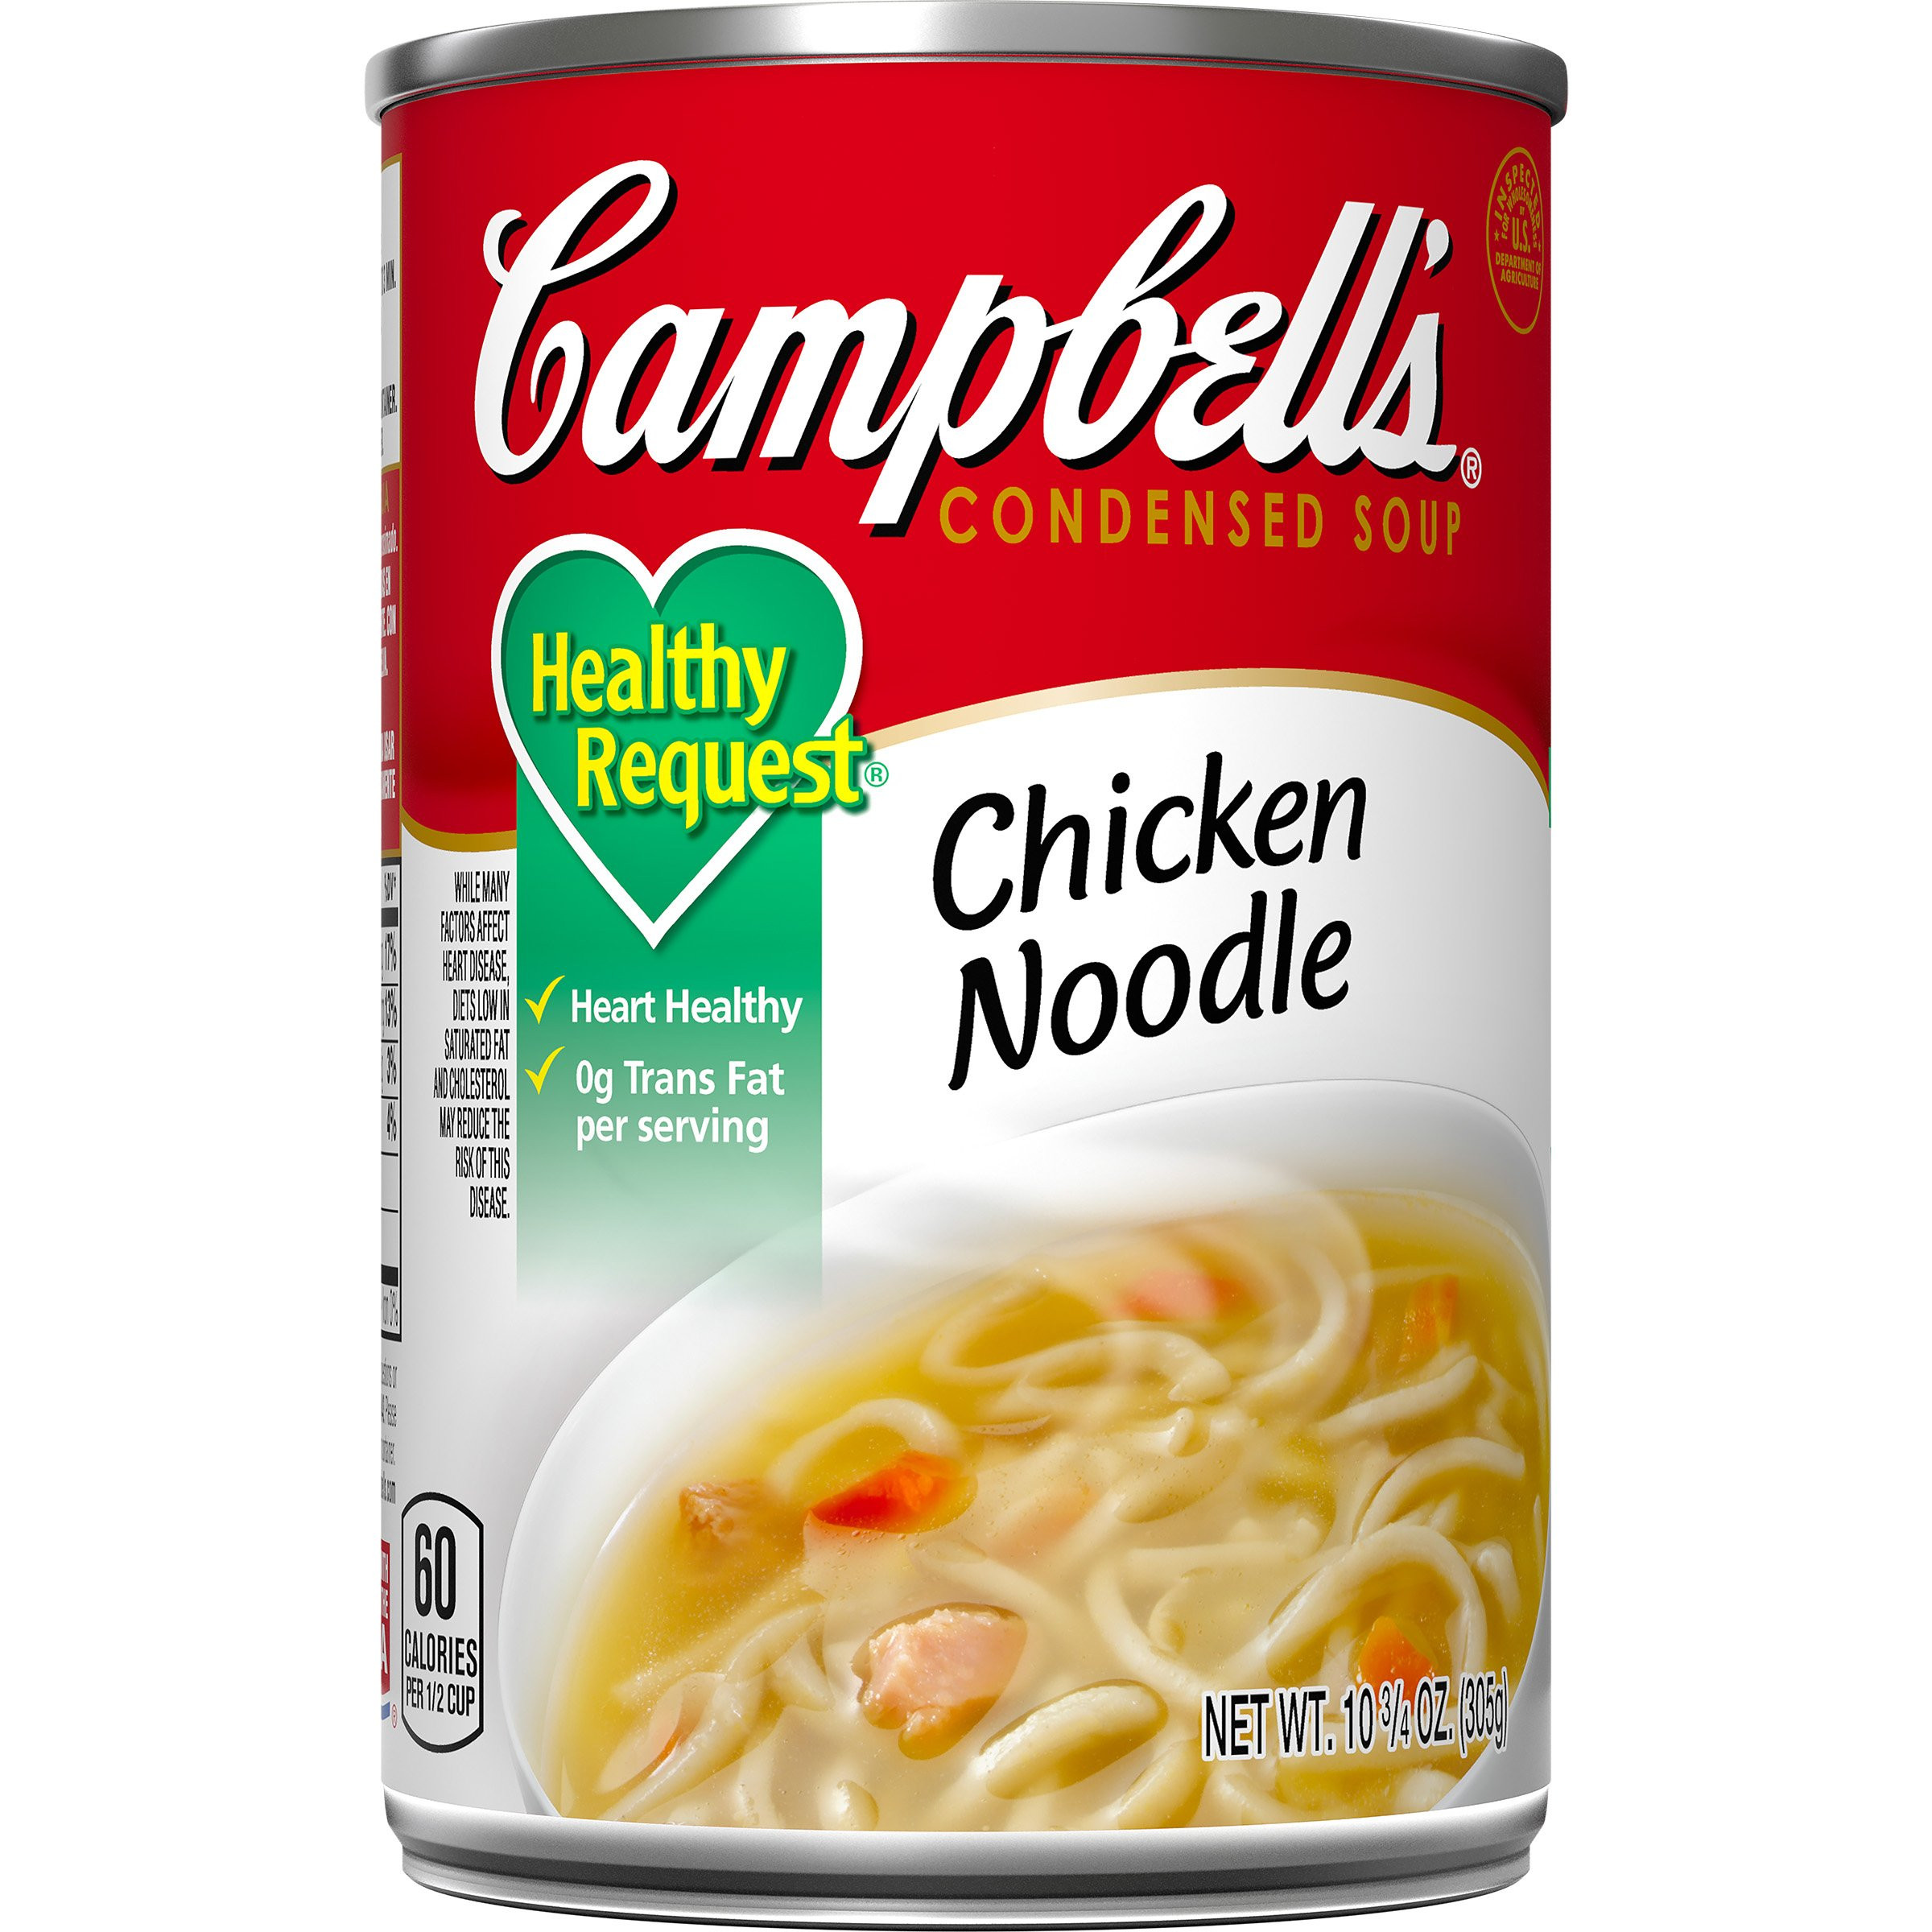 Campbell Chicken Noodle Soup
 Amazon Campbell s Healthy Request Condensed Soup